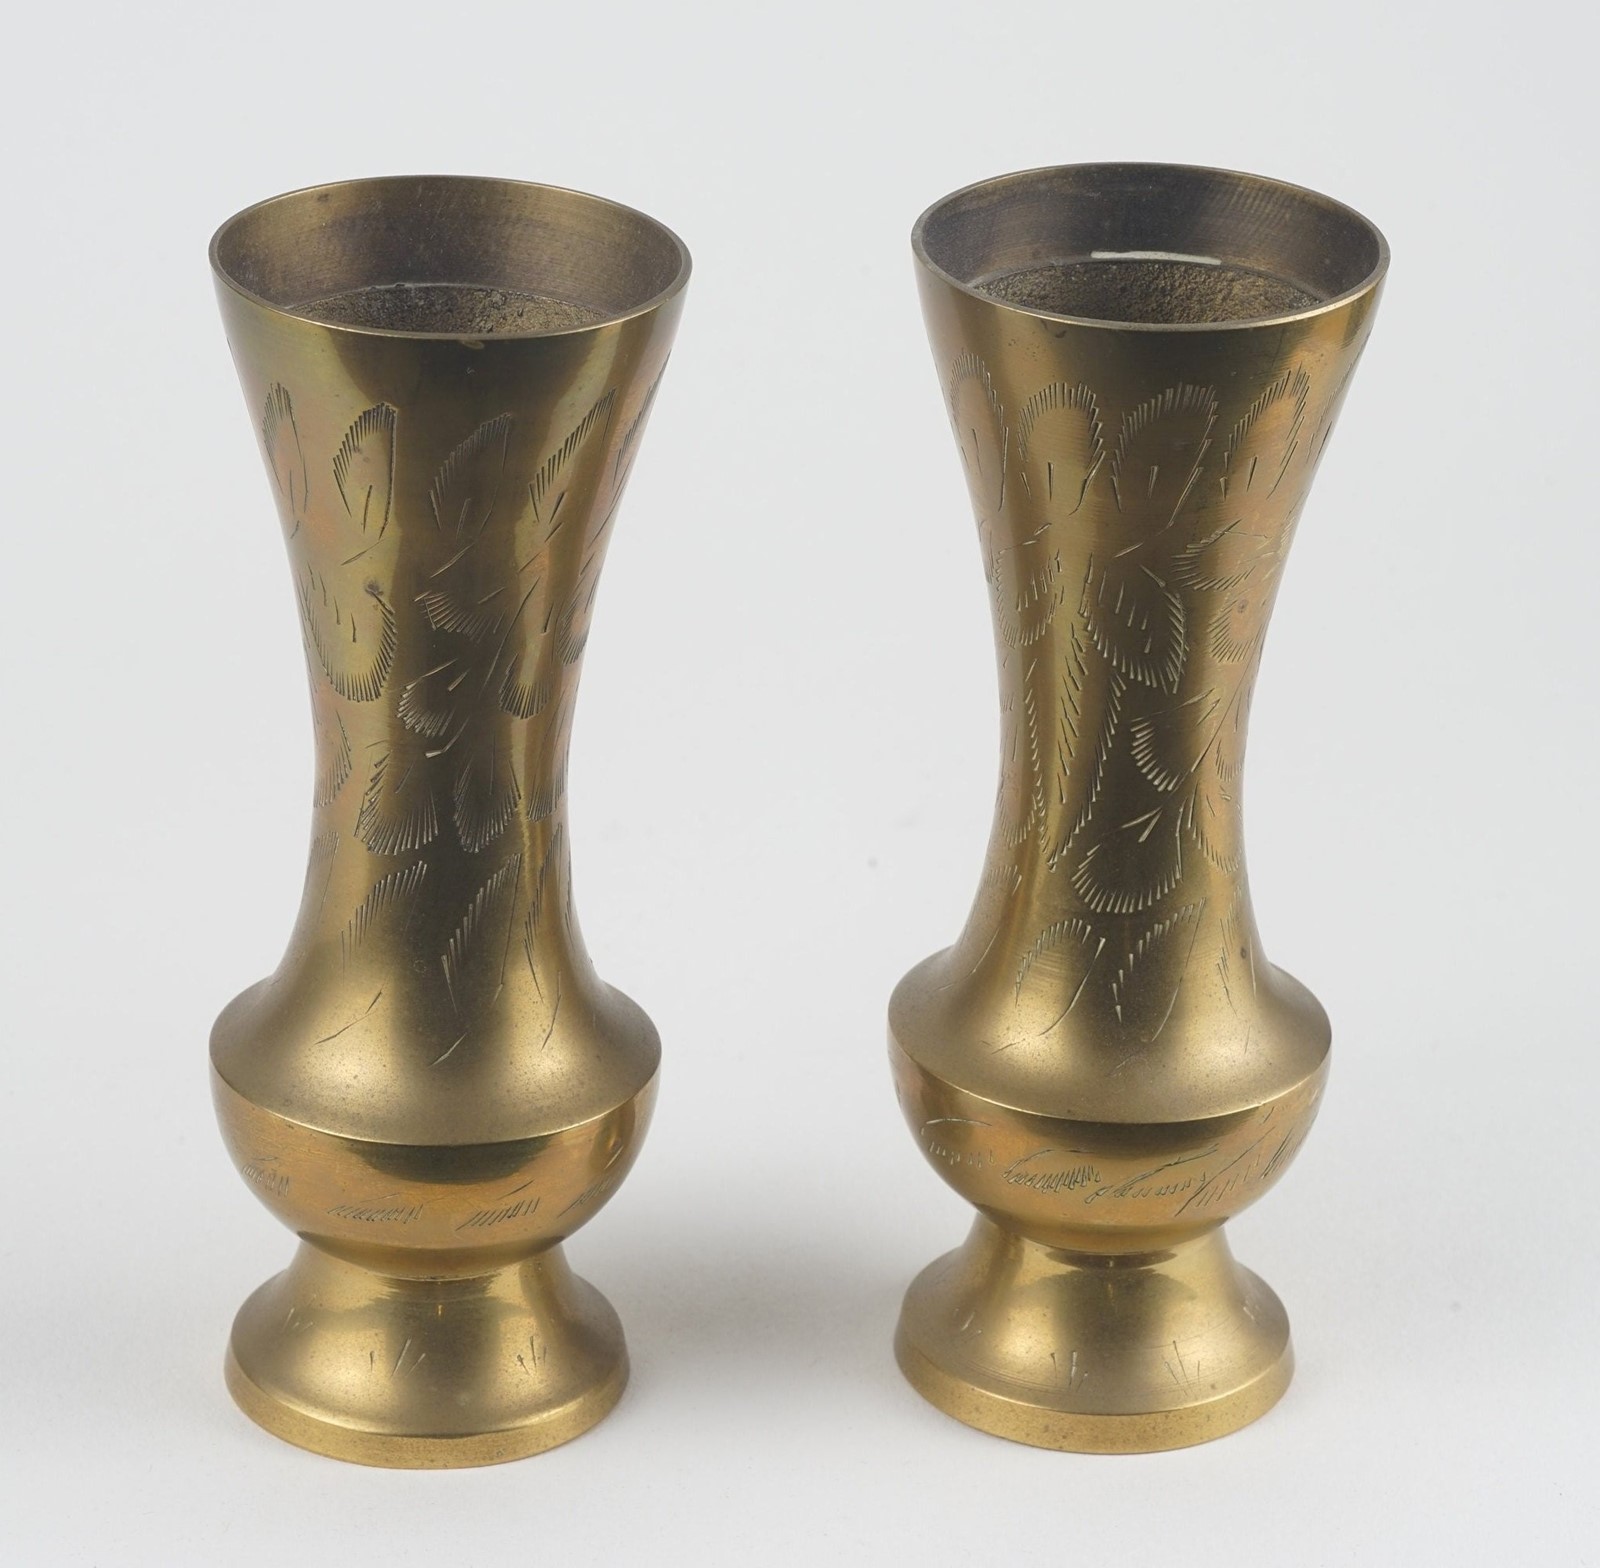 Pair Of Indian Brass Vases Circa 1945 - The Hoarde Vintage